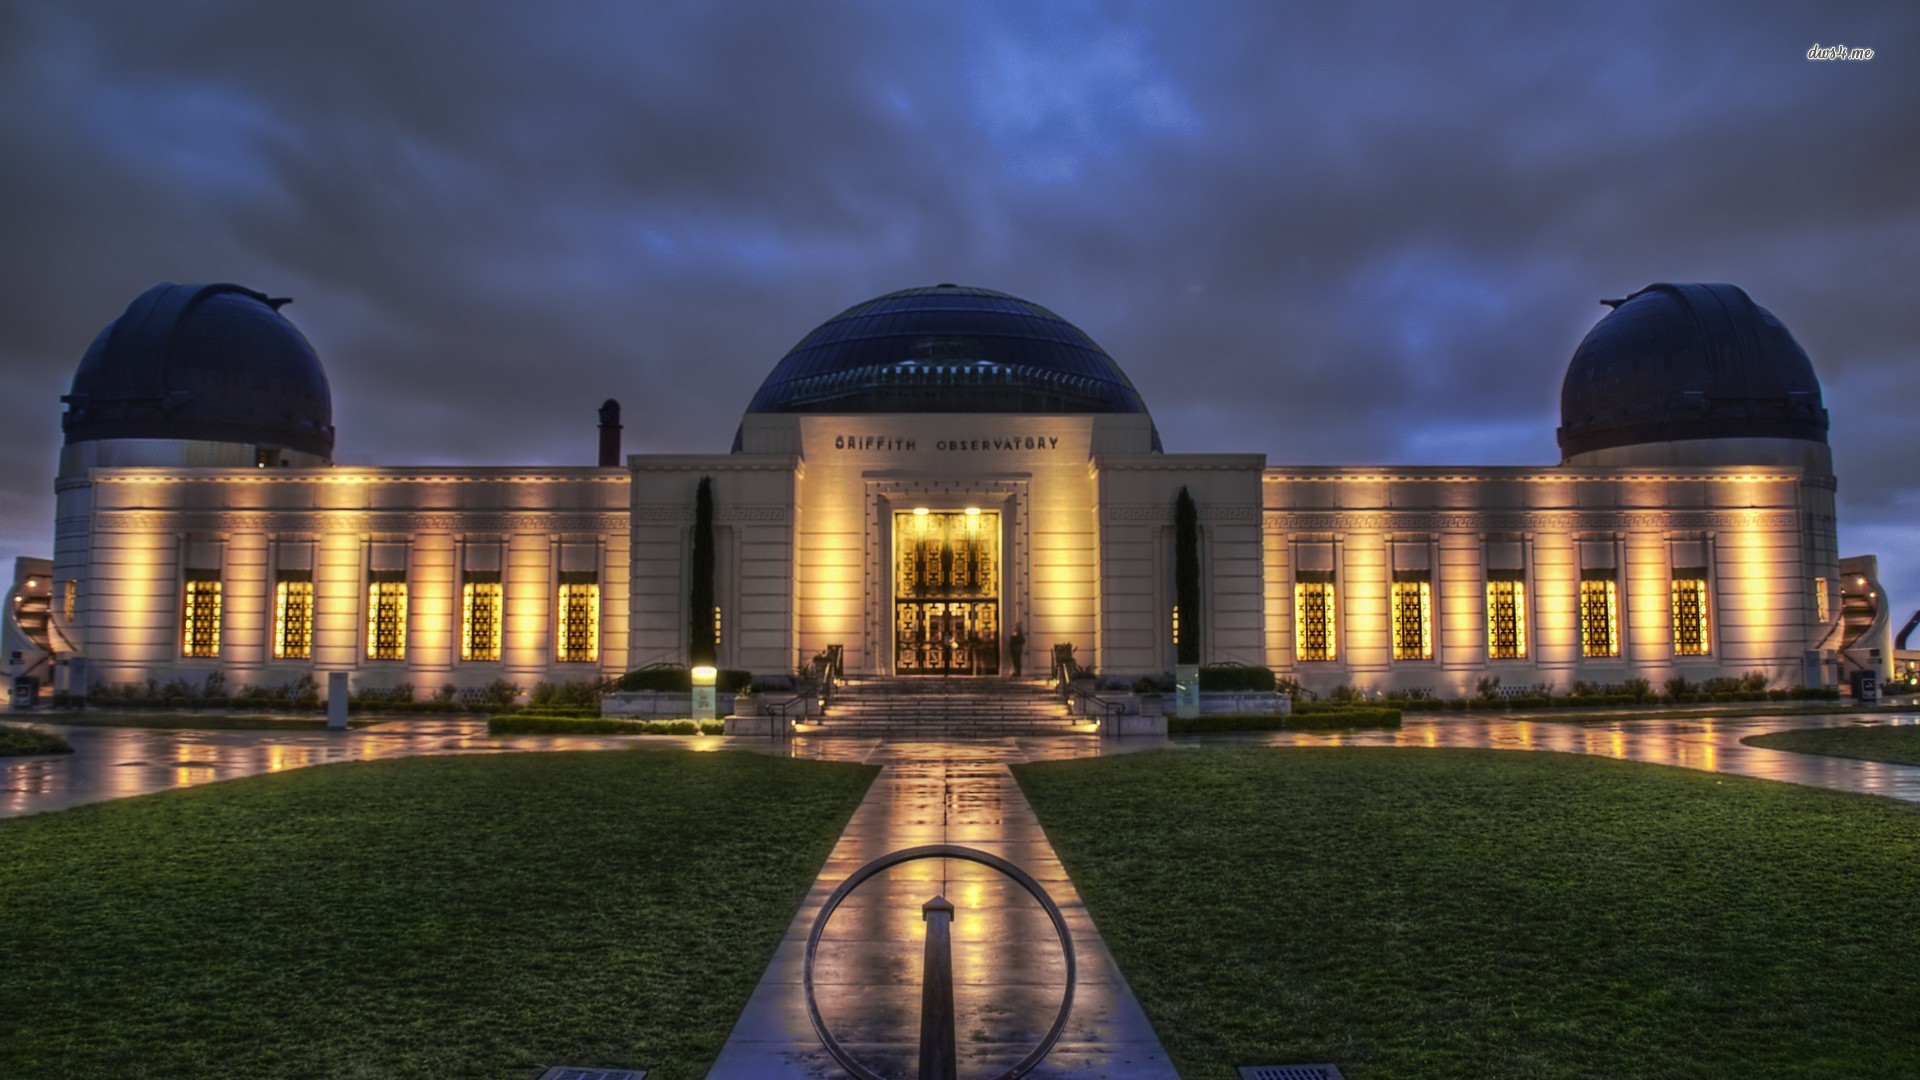 Griffith Observatory - HD Wallpaper 